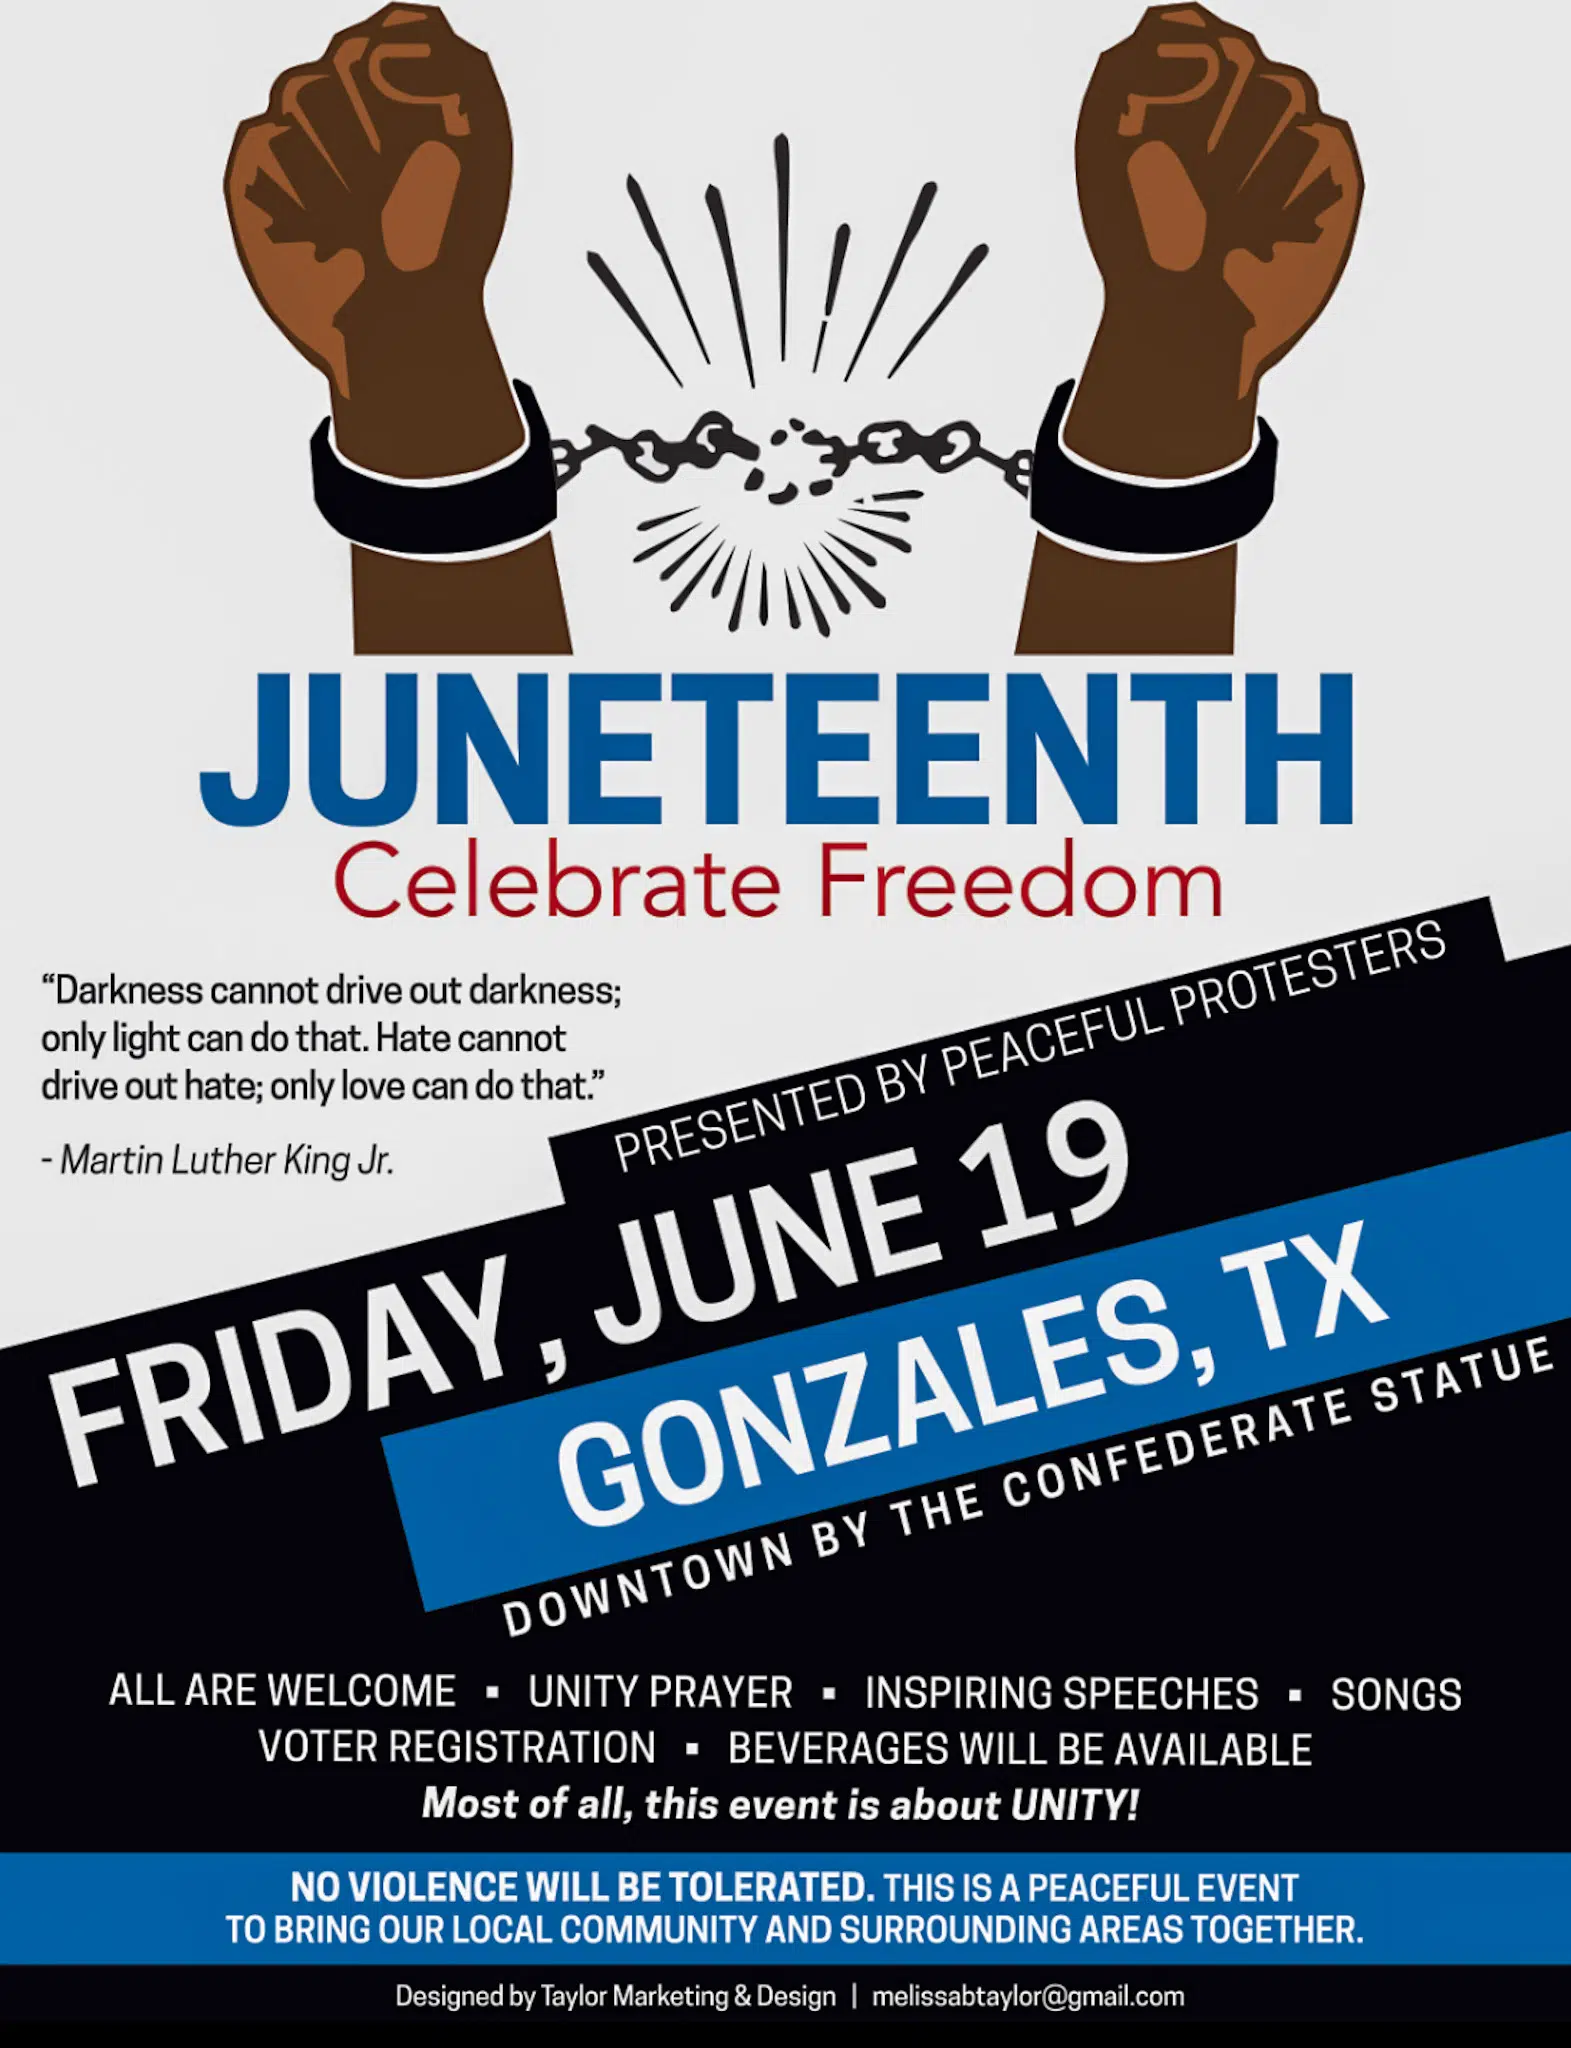 Seguin, Guadalupe County receives special invite to Juneteenth celebration in Gonzales 